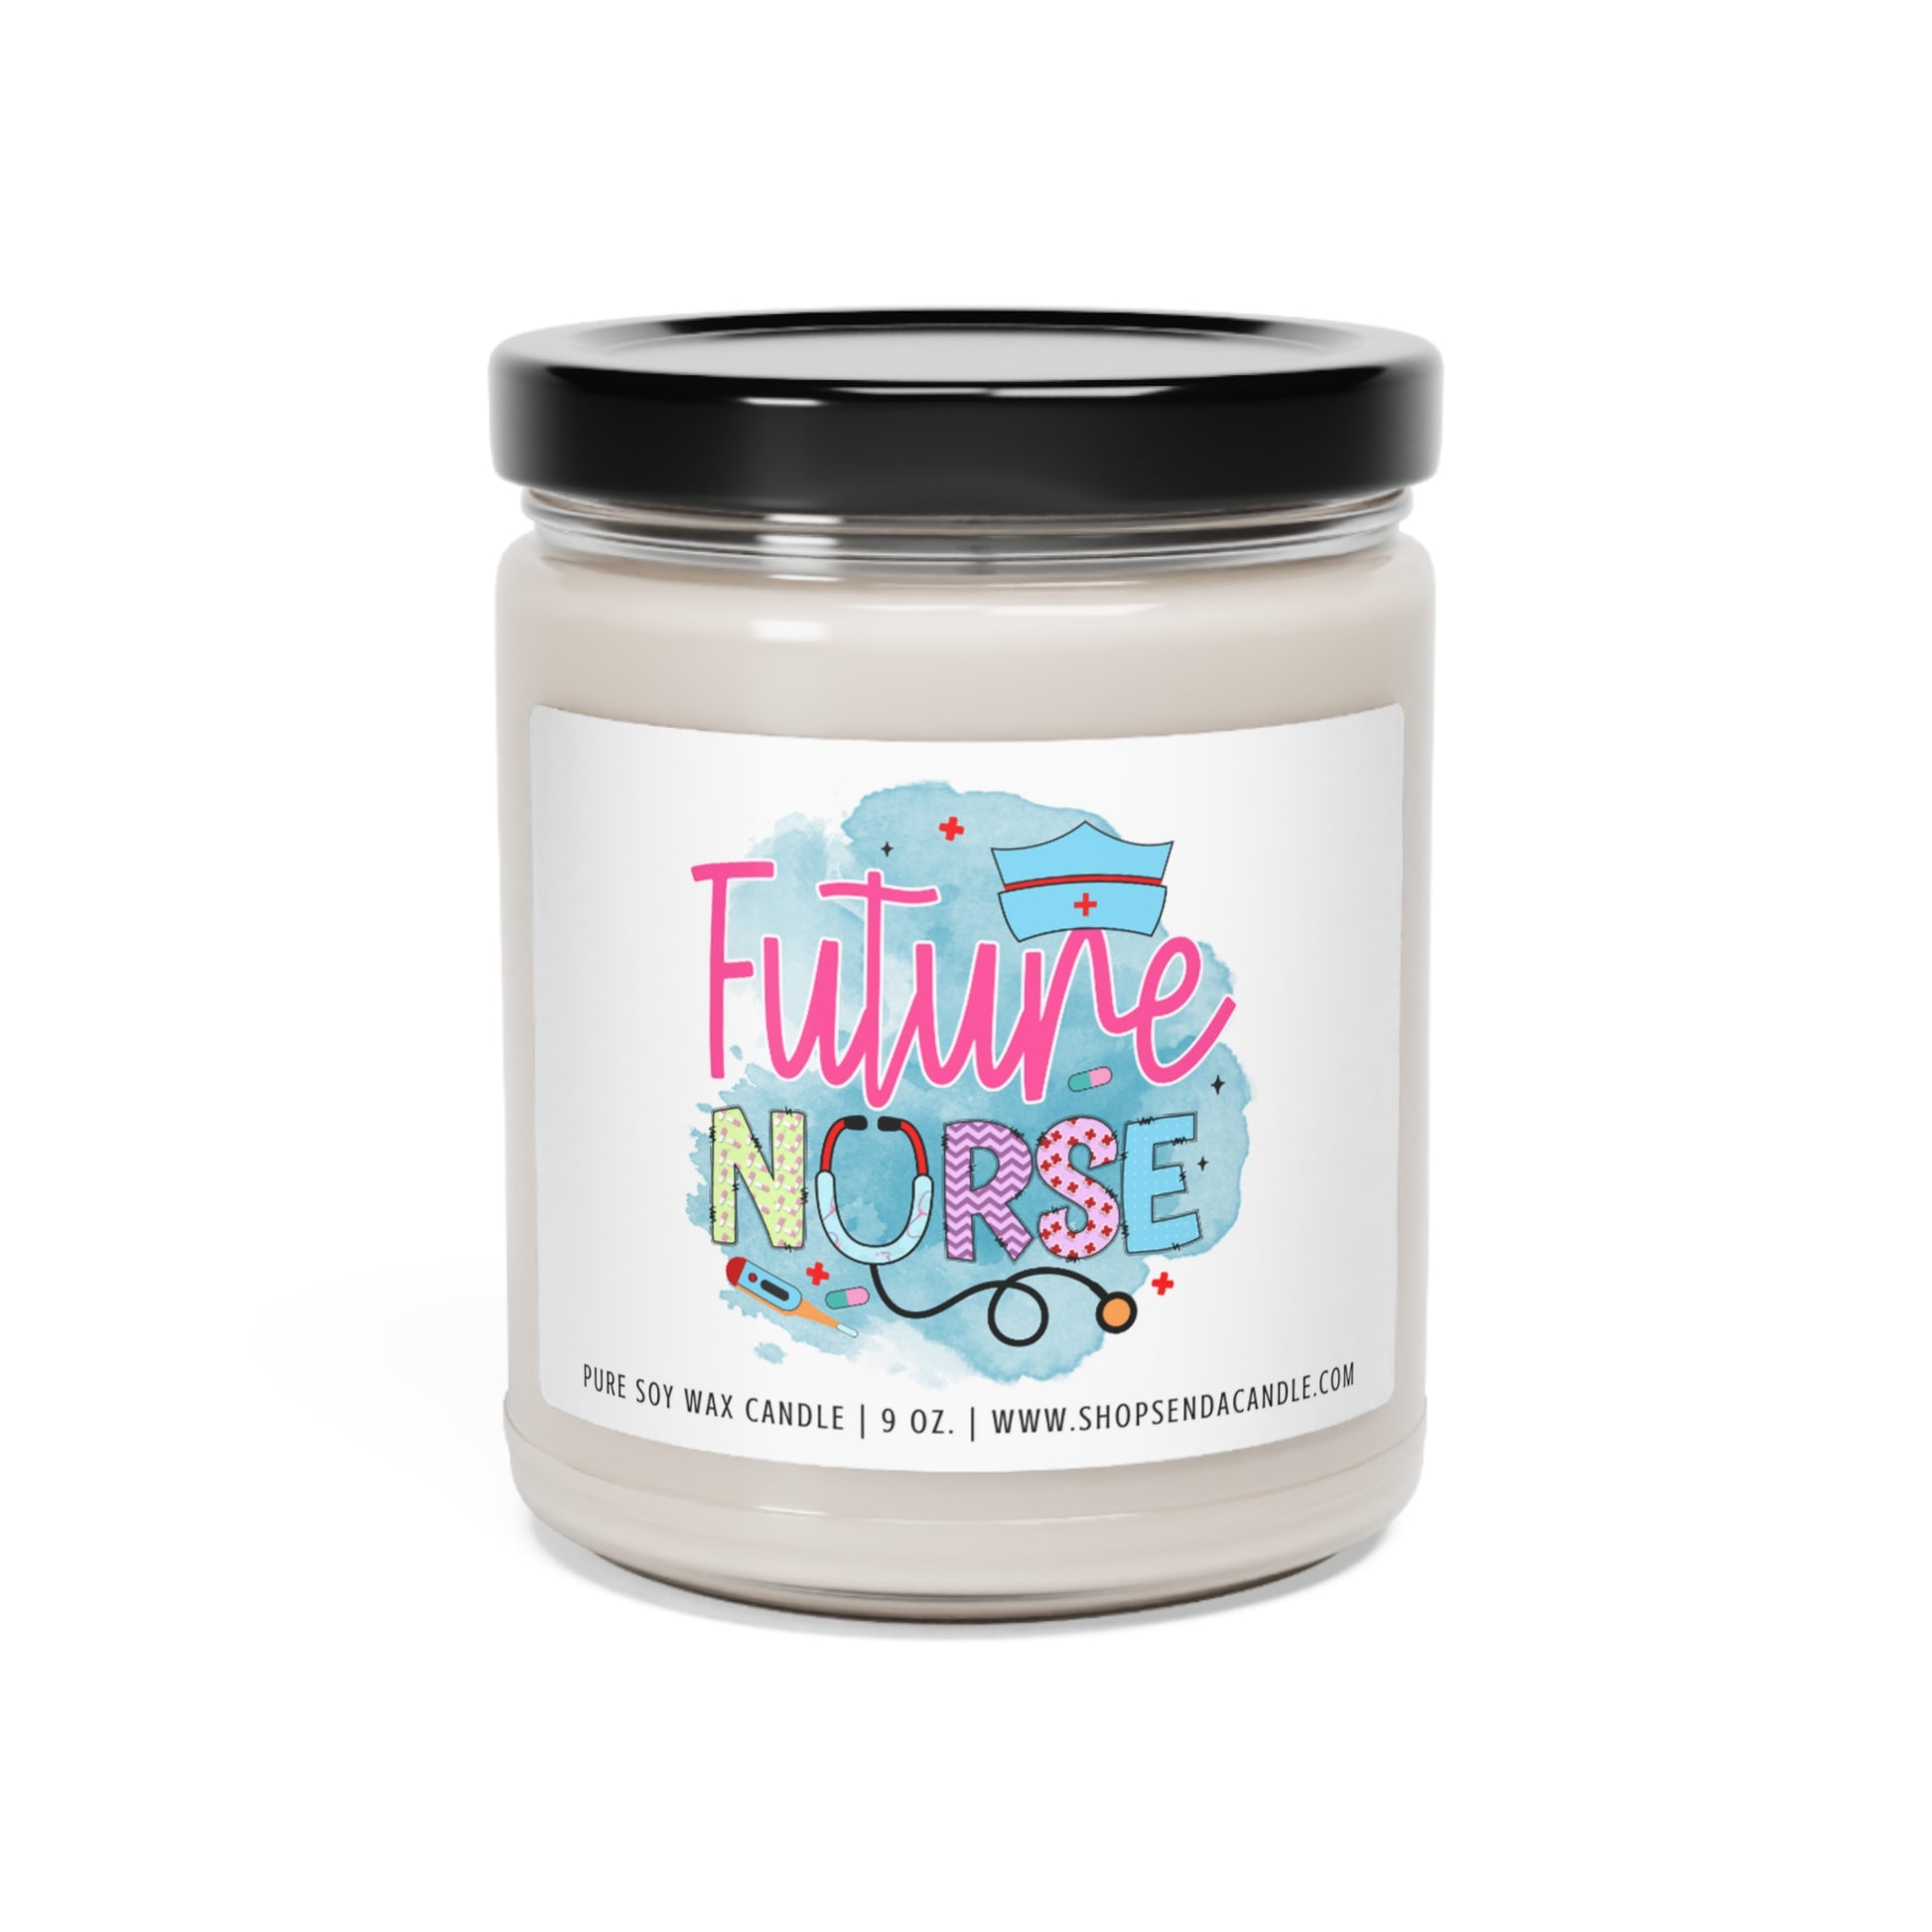 Gifts For Nursing Graduates | Send A Candle